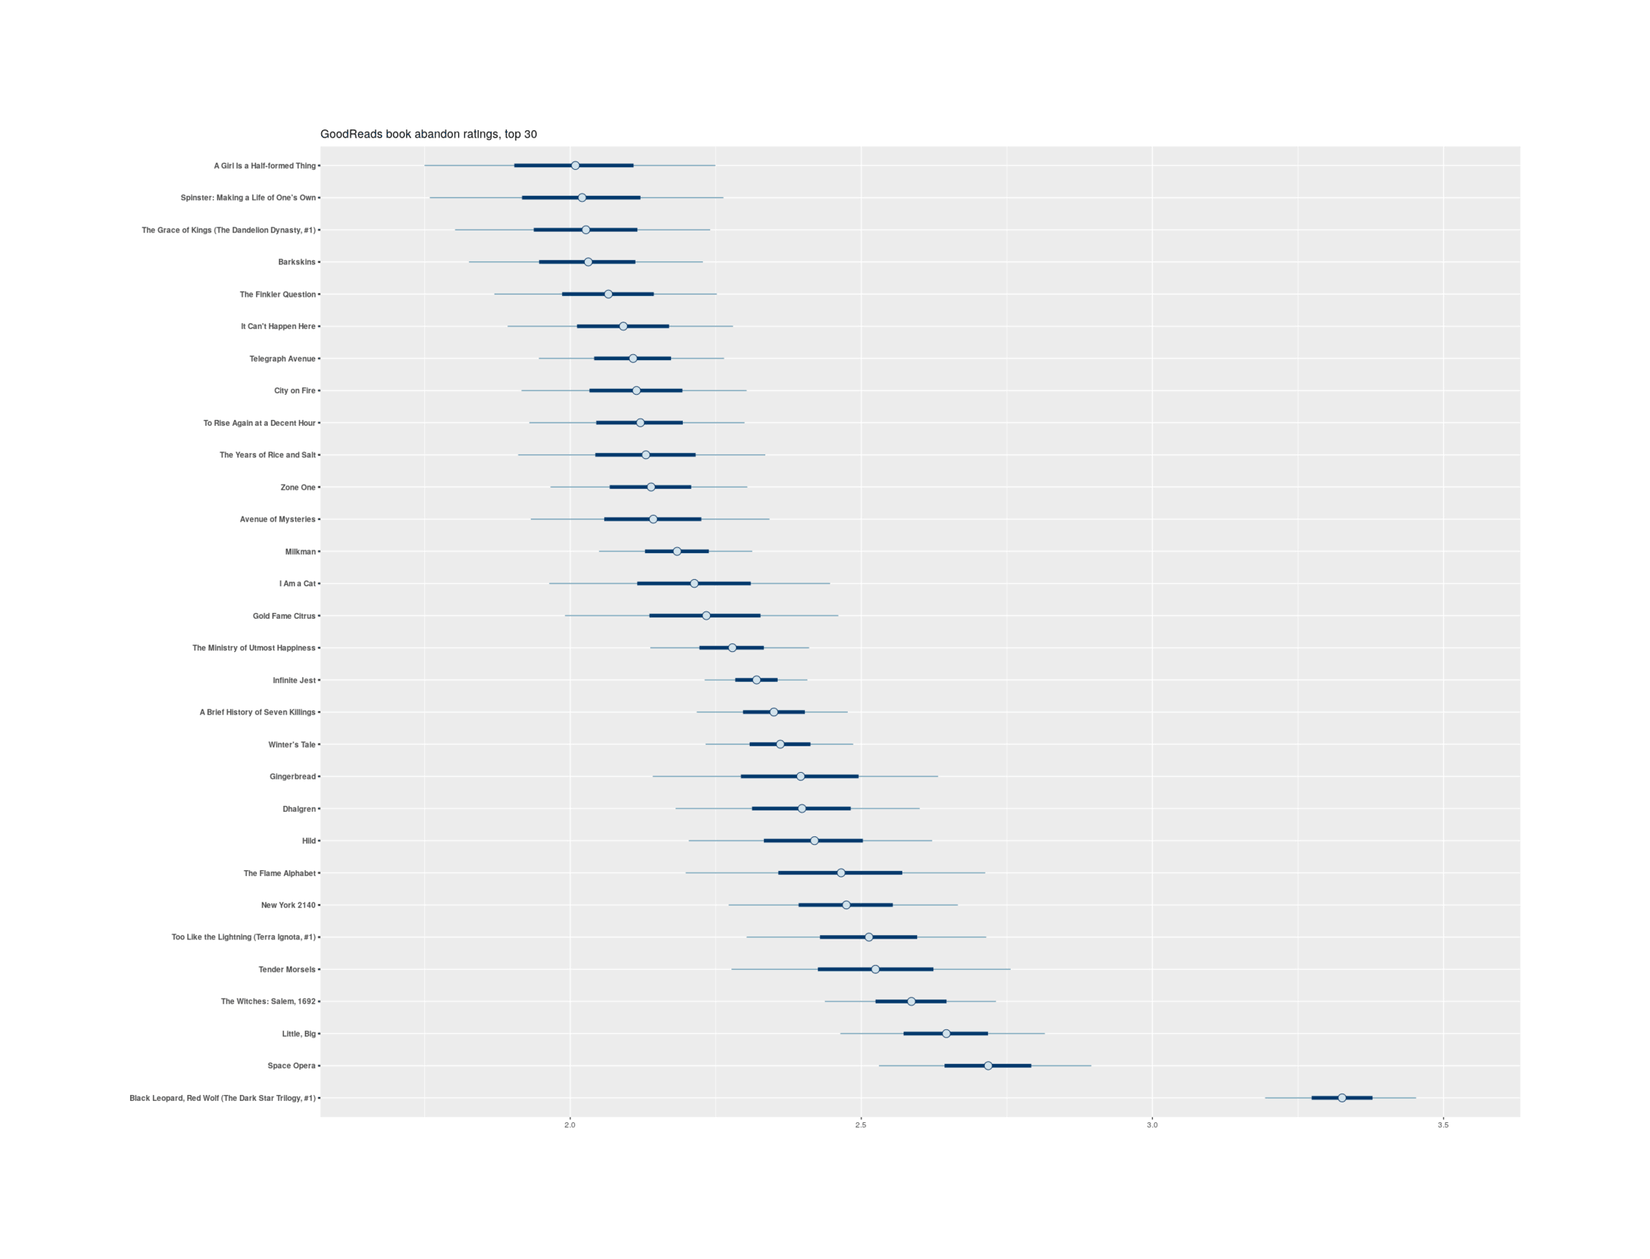 Top 30 GoodReads popular books by abandonment rate (Bayesian posteriors)